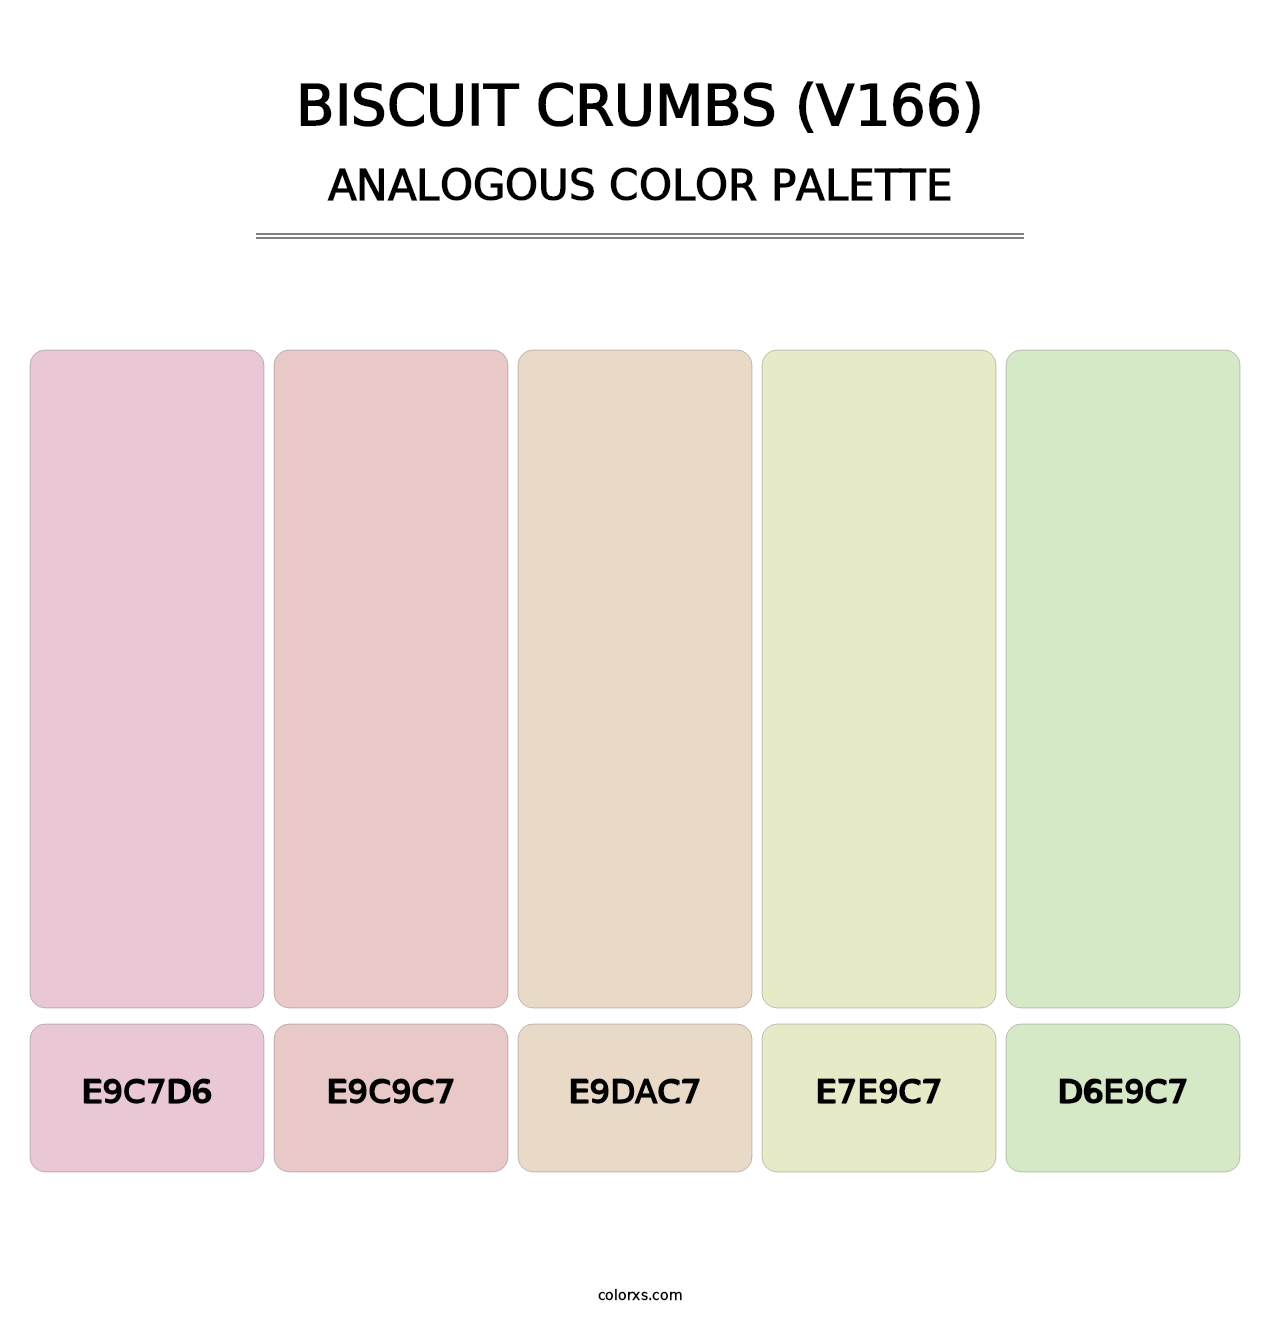 Biscuit Crumbs (V166) - Analogous Color Palette